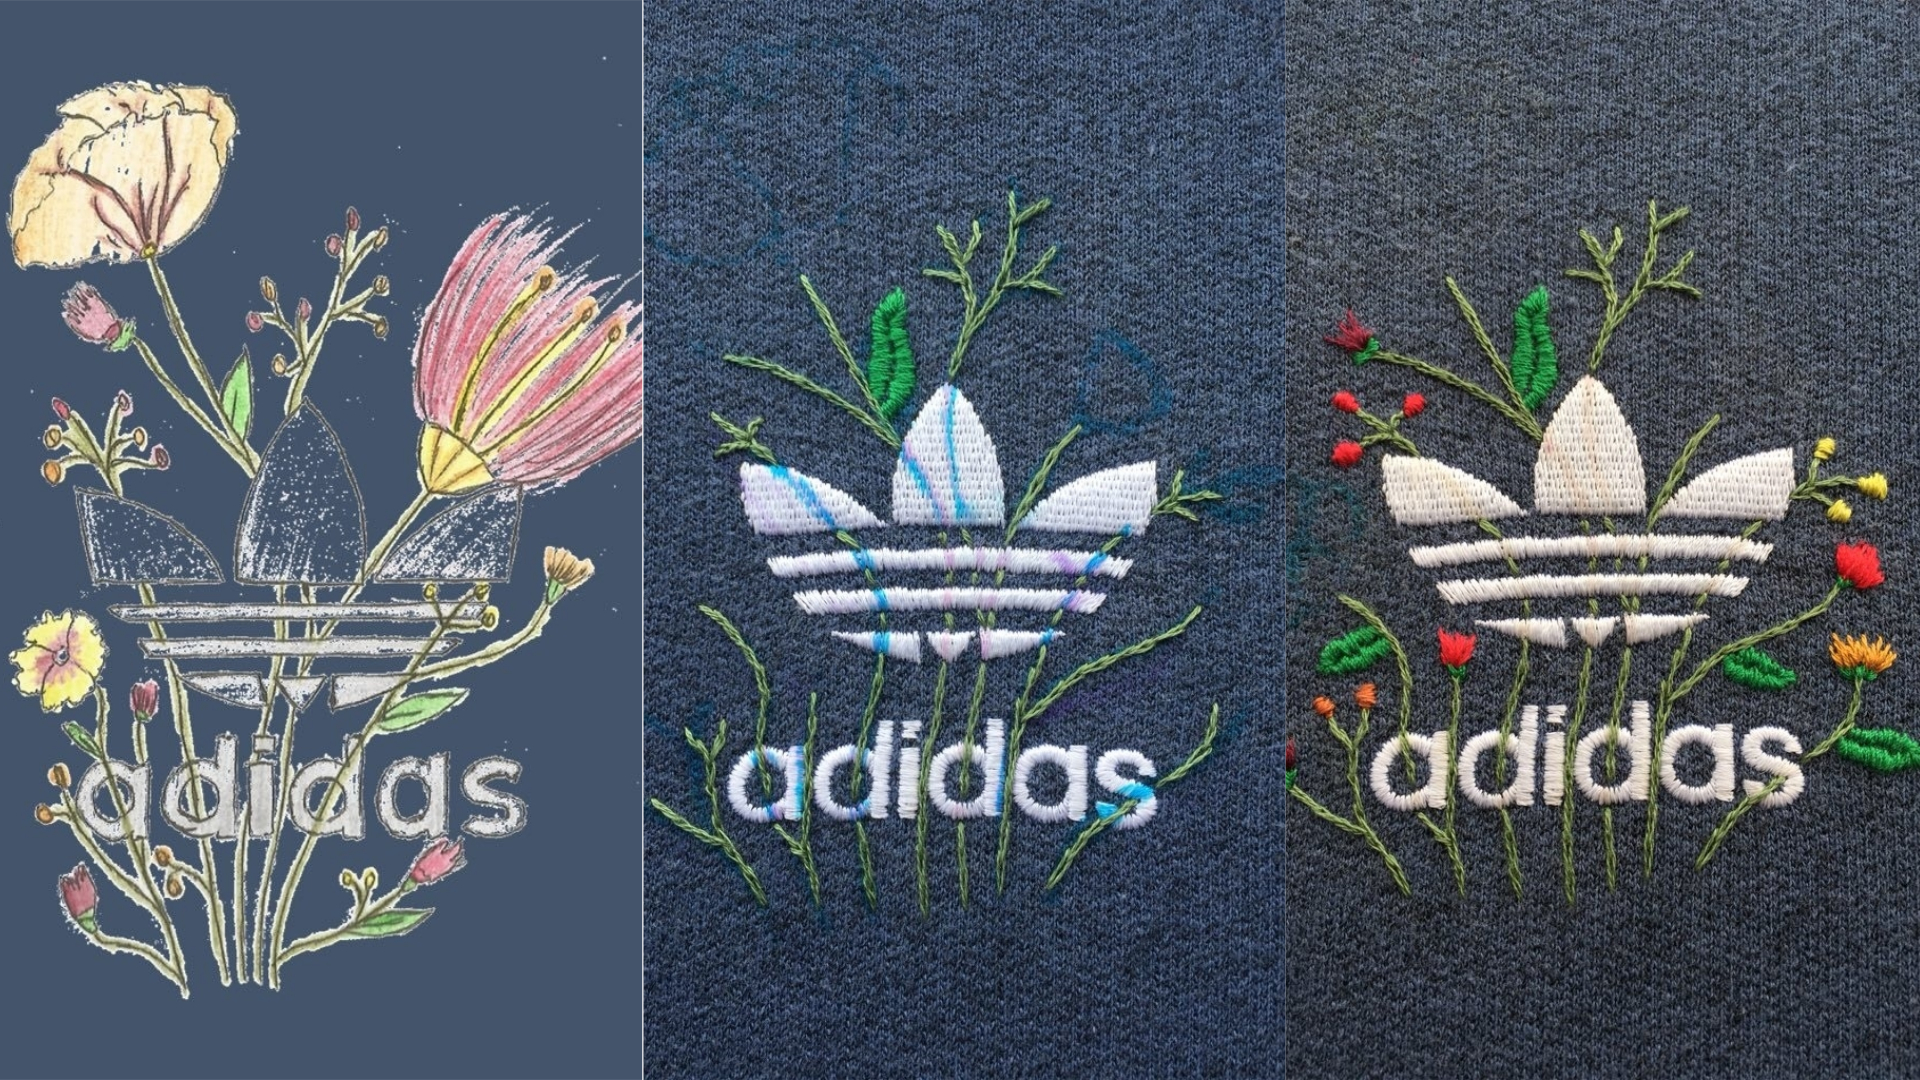 The adidas embroidery as a work in progress